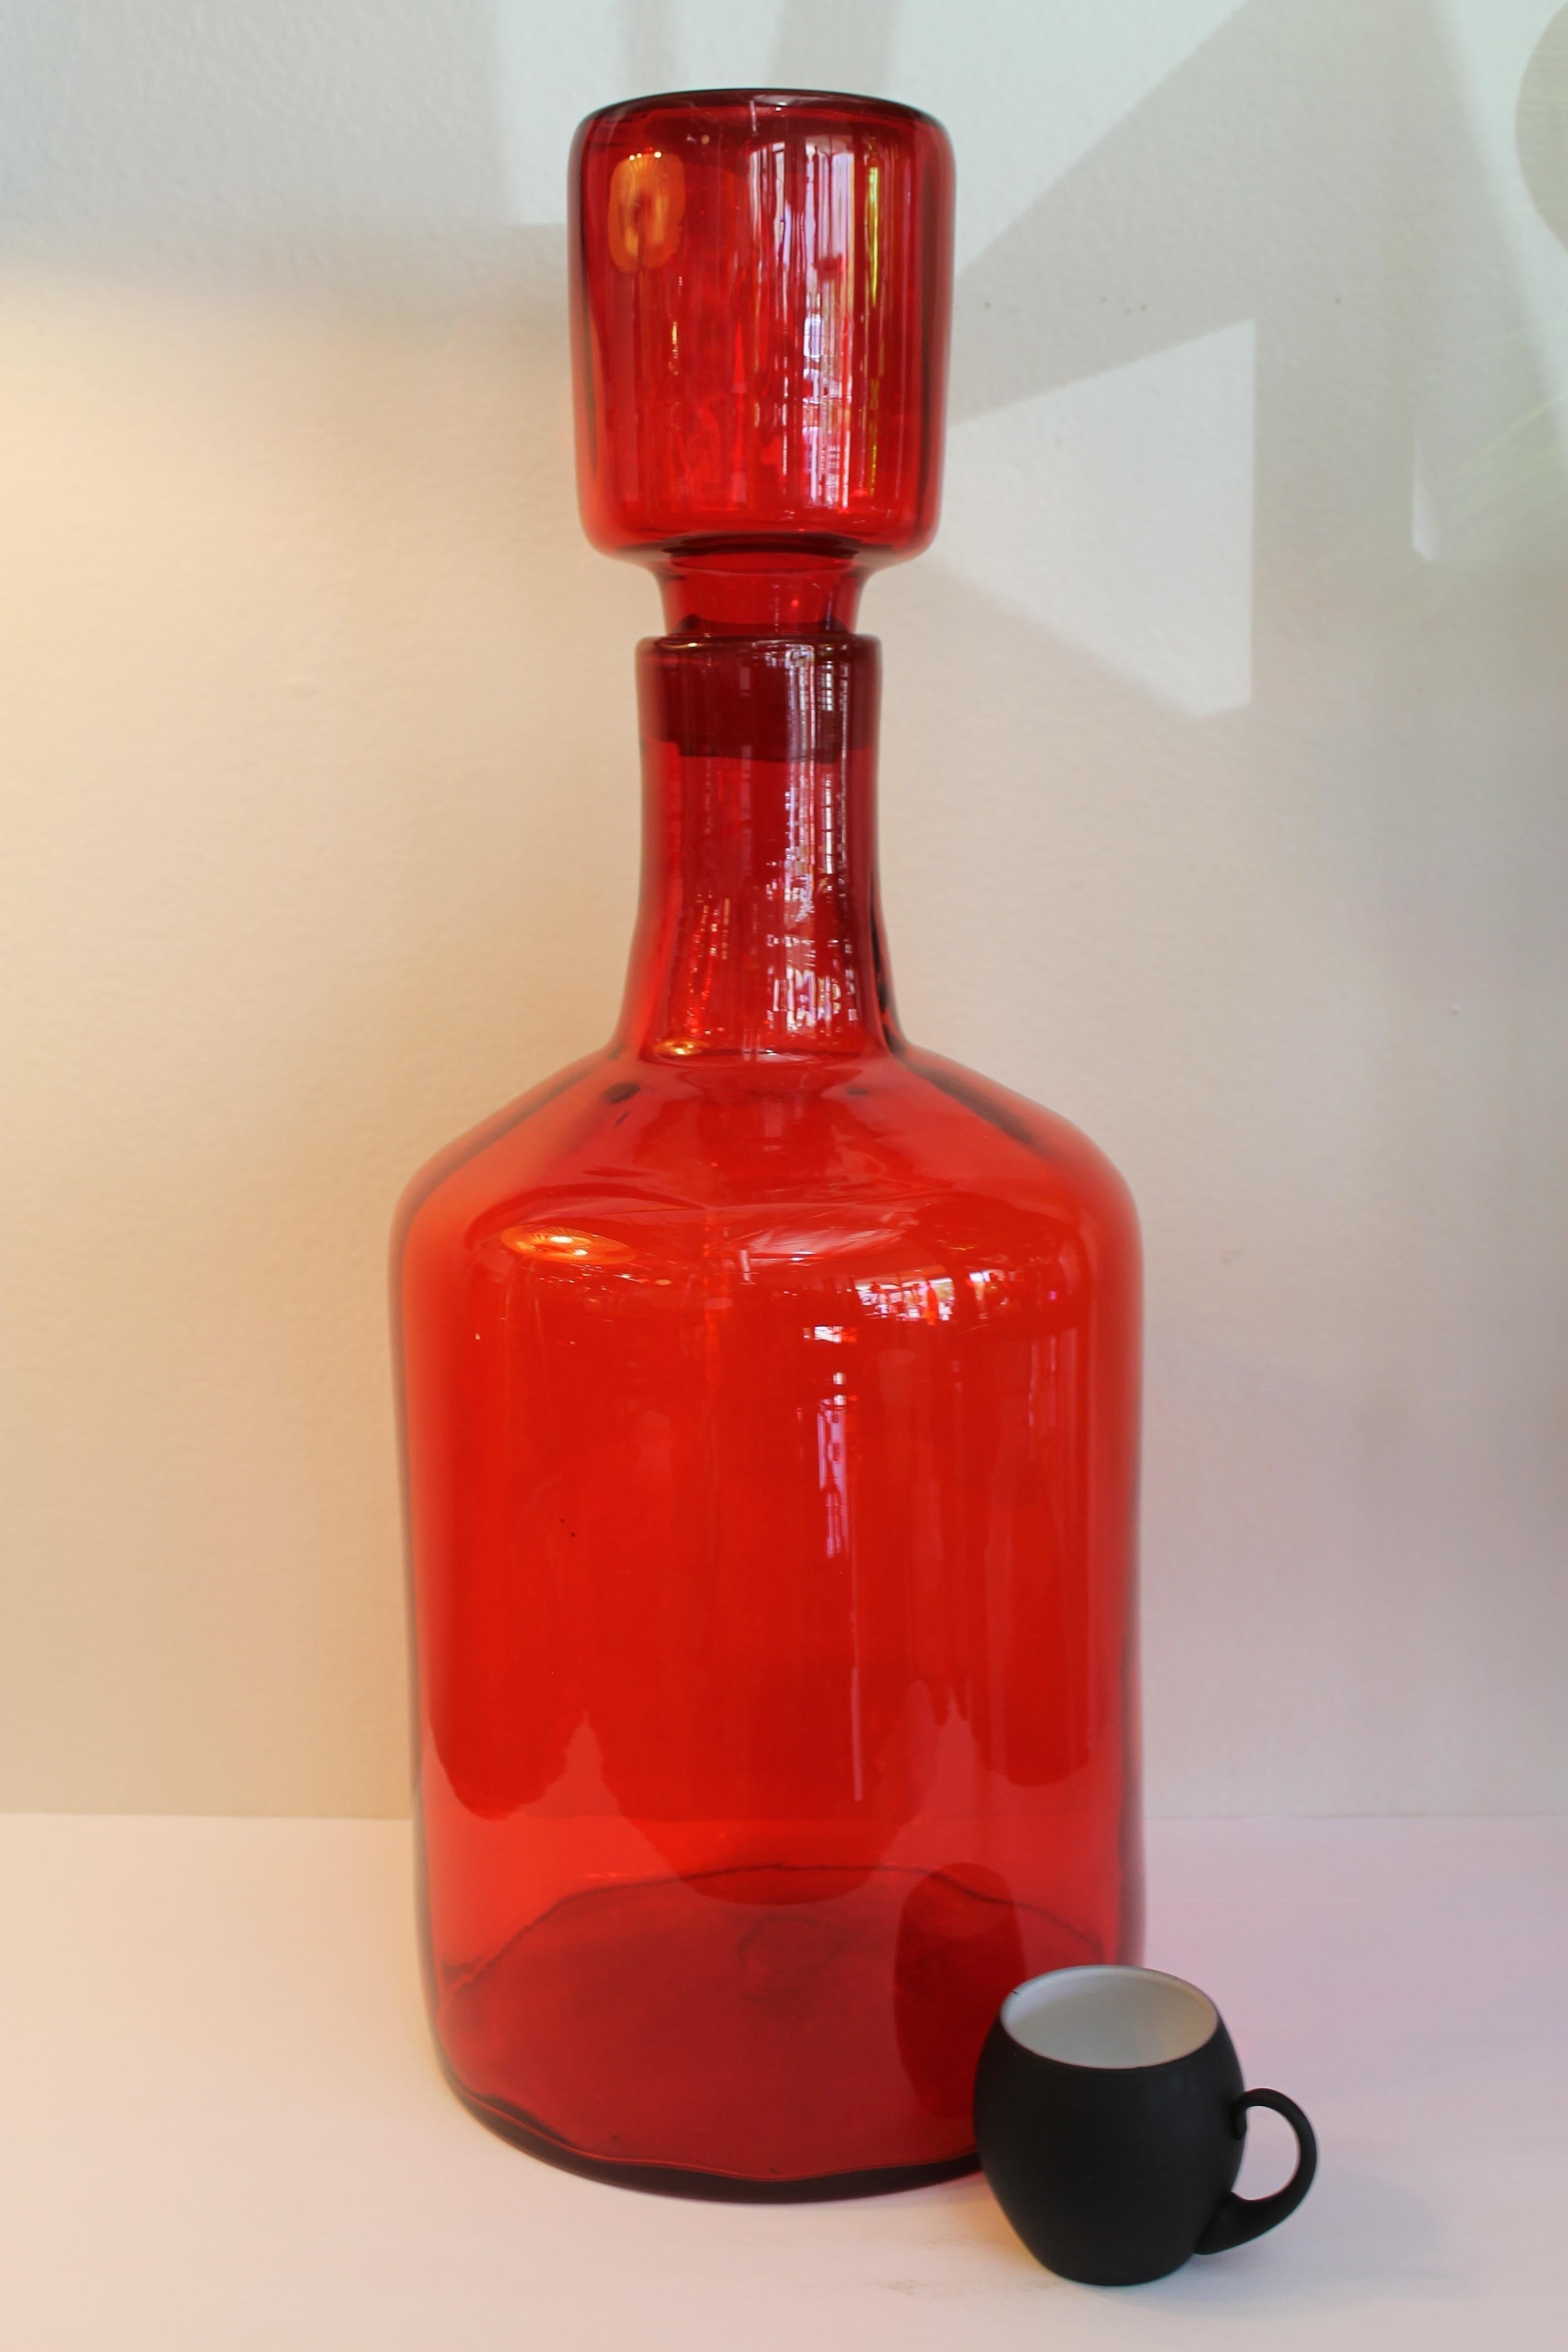 Architectural Blenko tangerine floor vessel/bottle with stopper by Wayne Husted. Bottle (without stopper) is 18